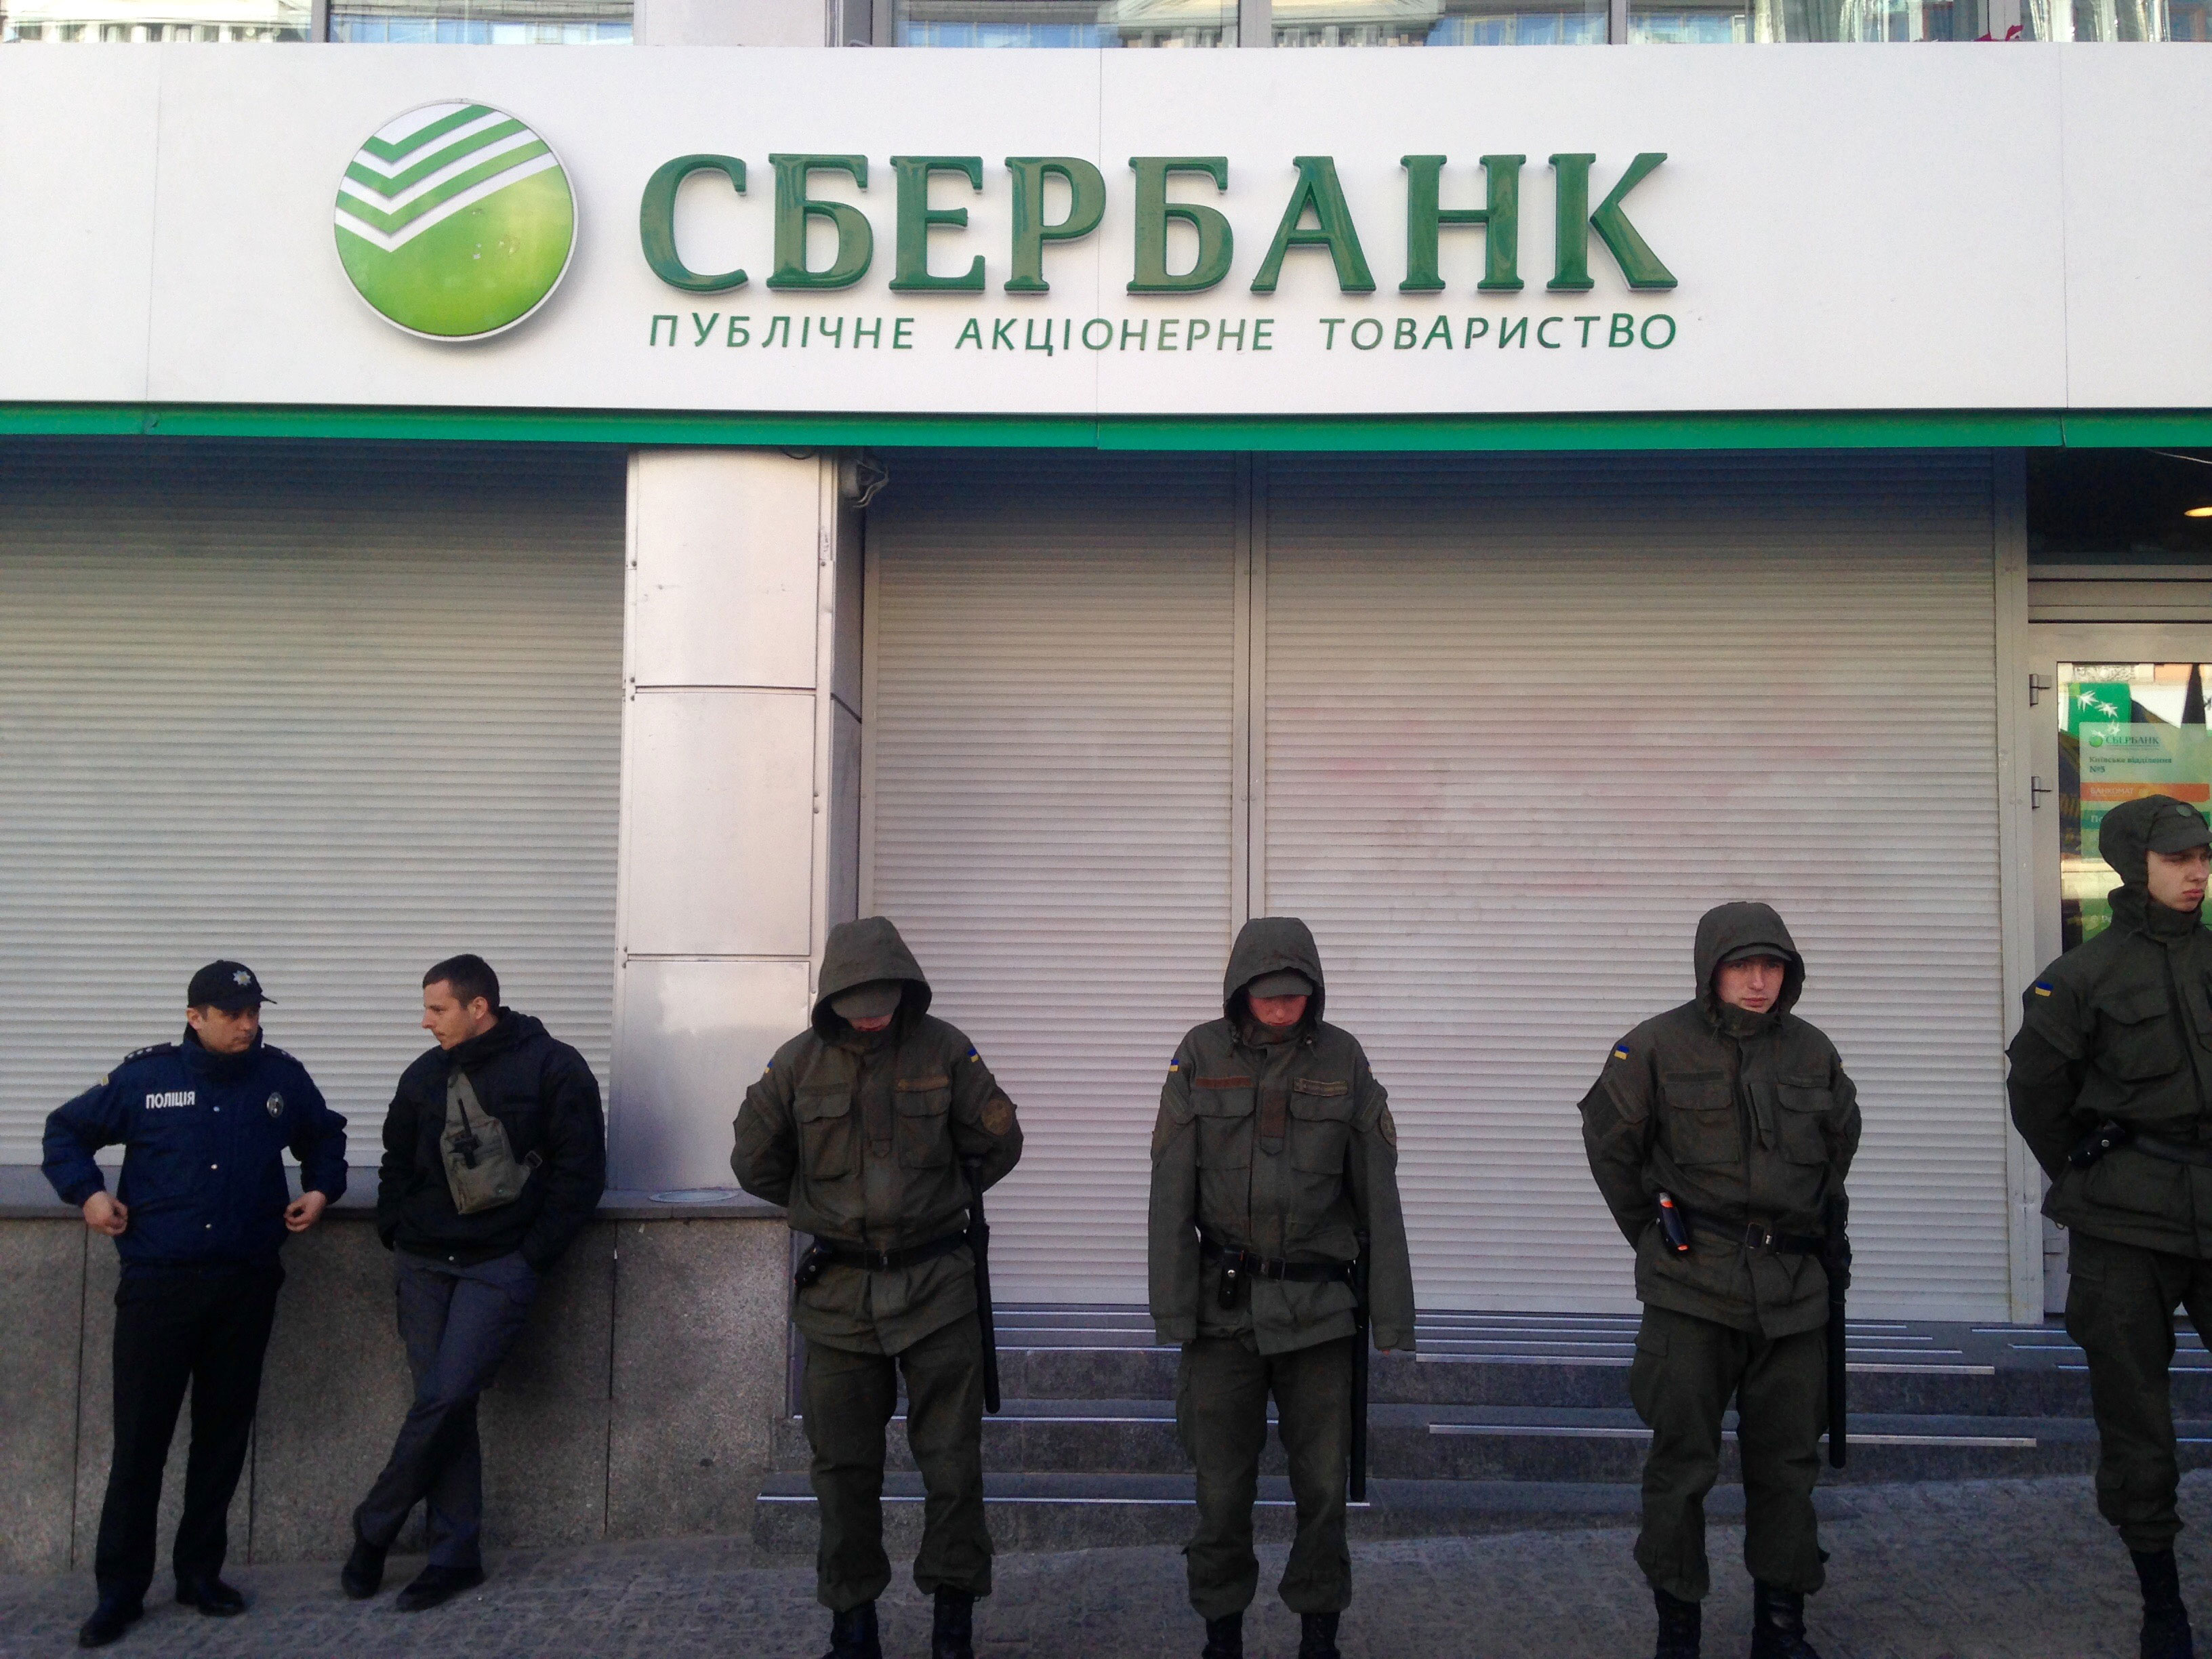 Ukrainian police on guard in front of a Russian bank in central Kyiv.